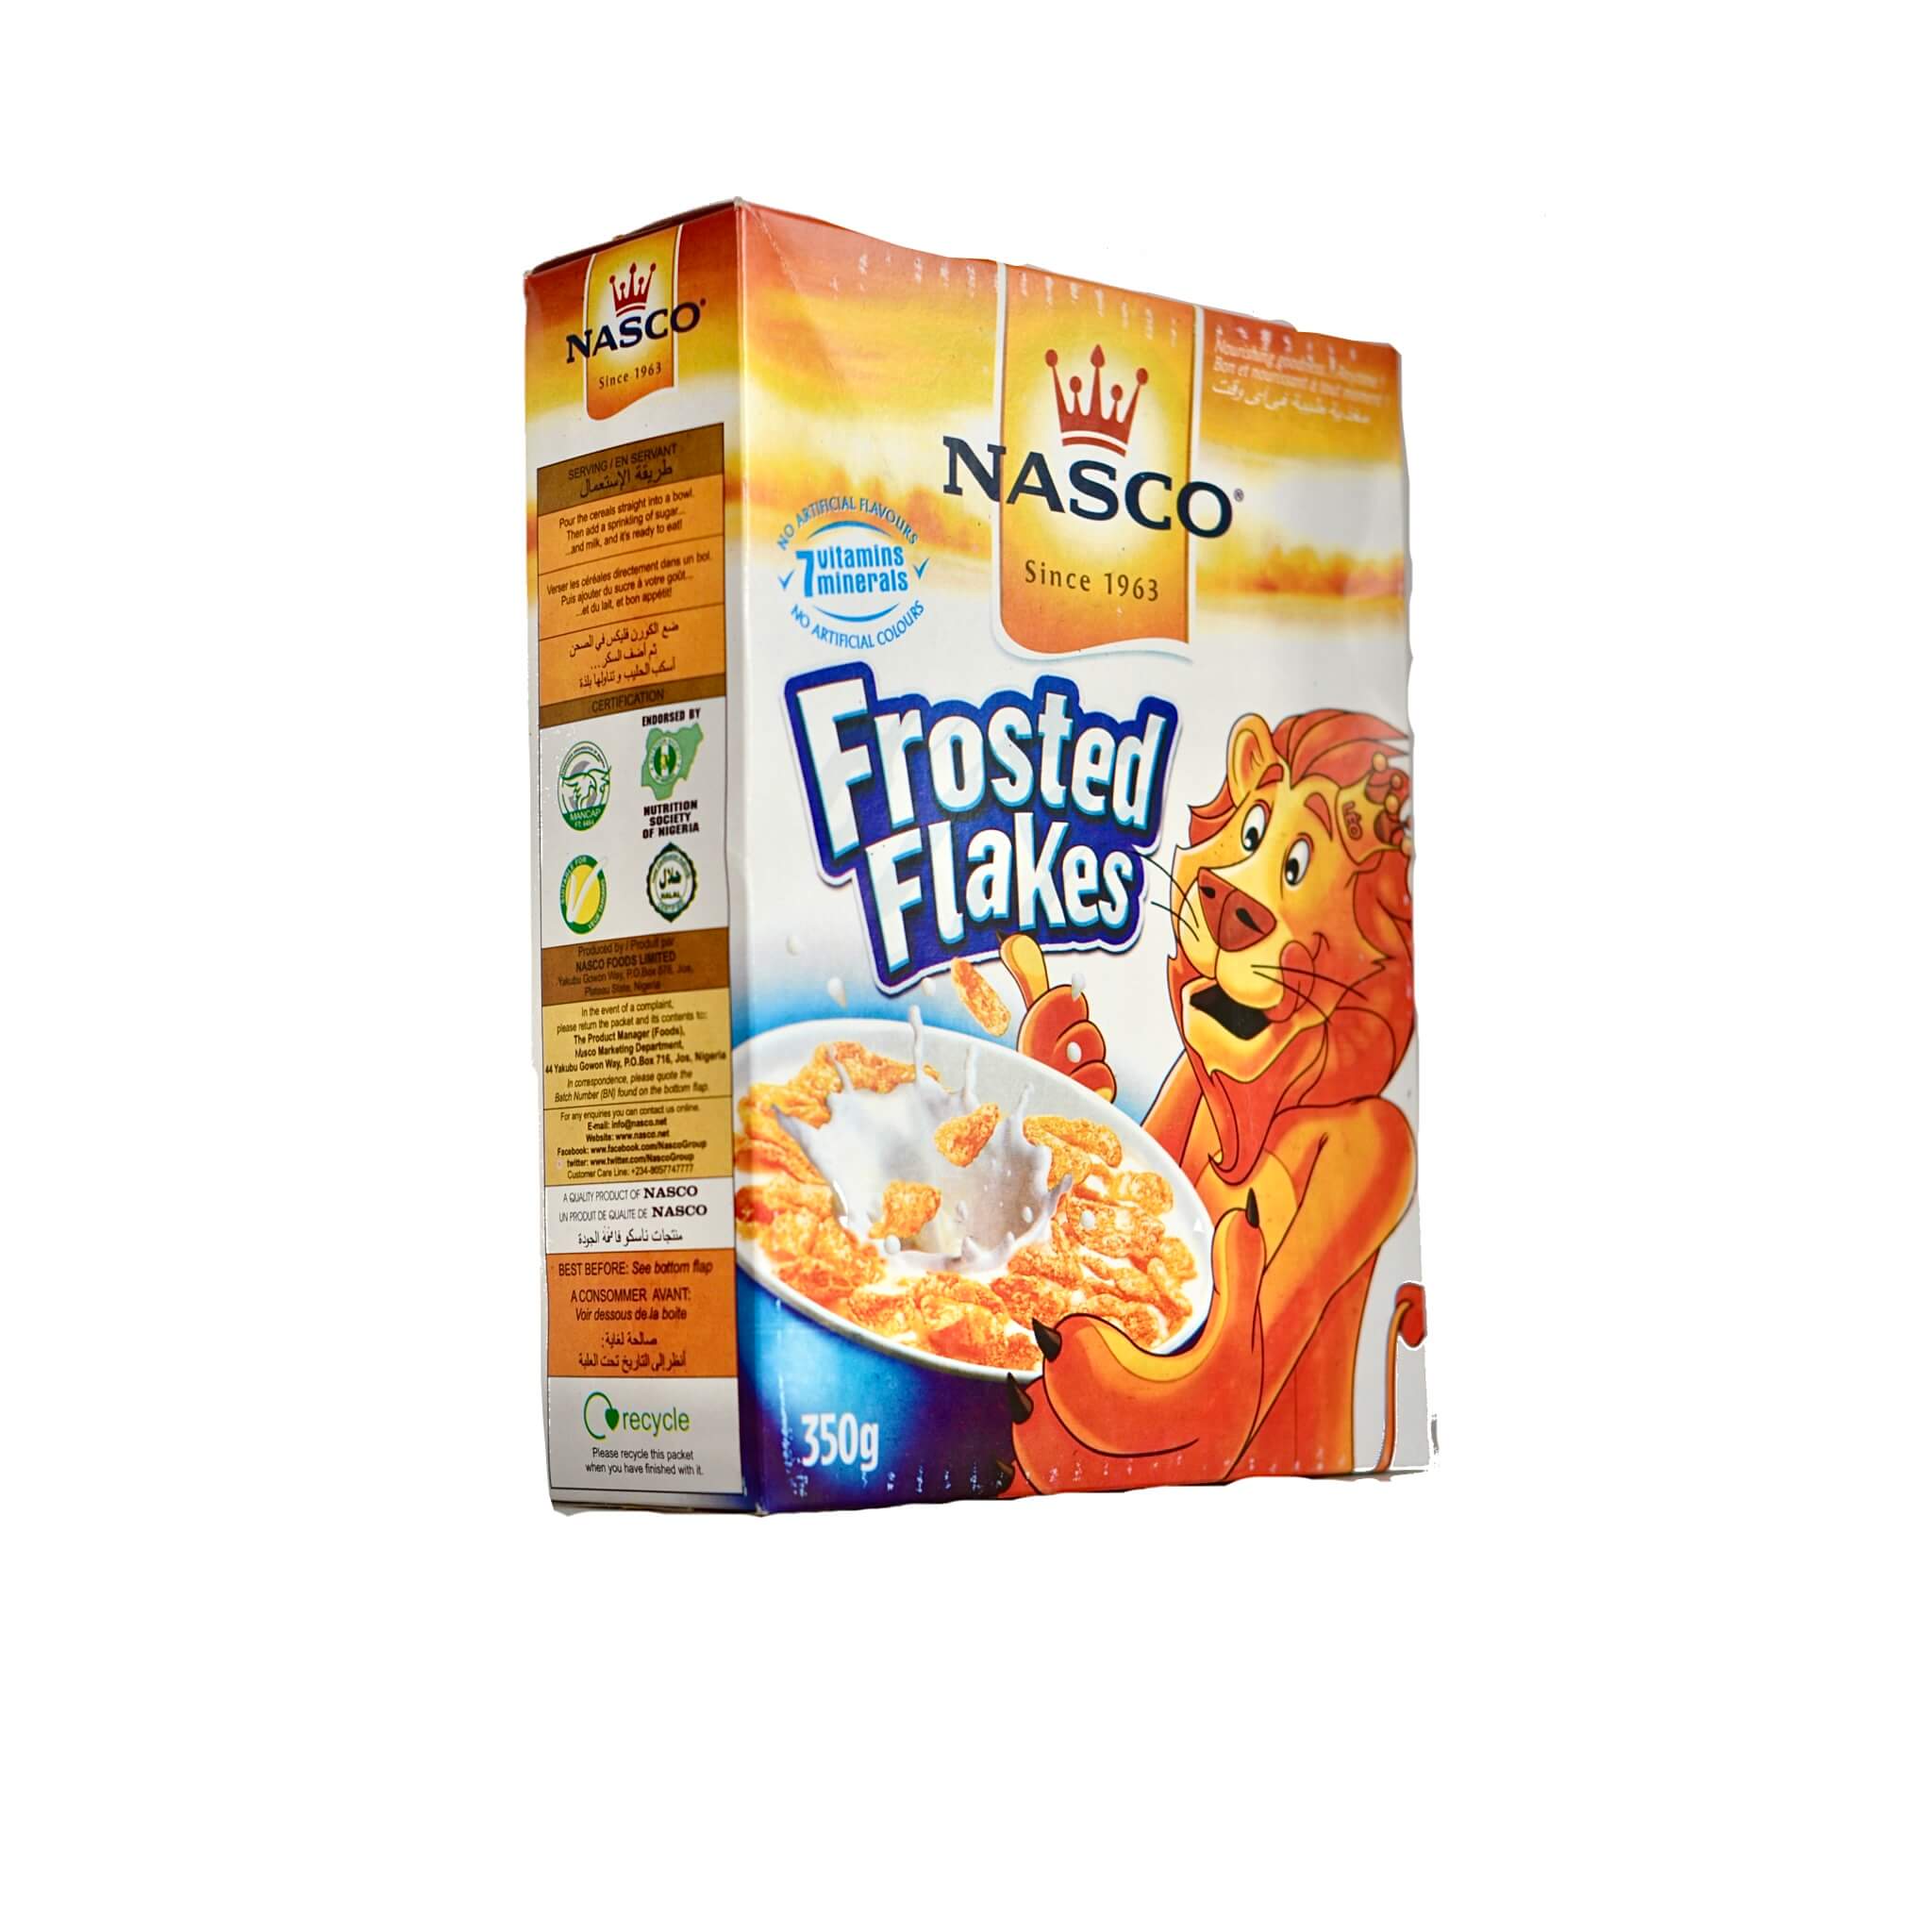 Nasco Frosted flakes